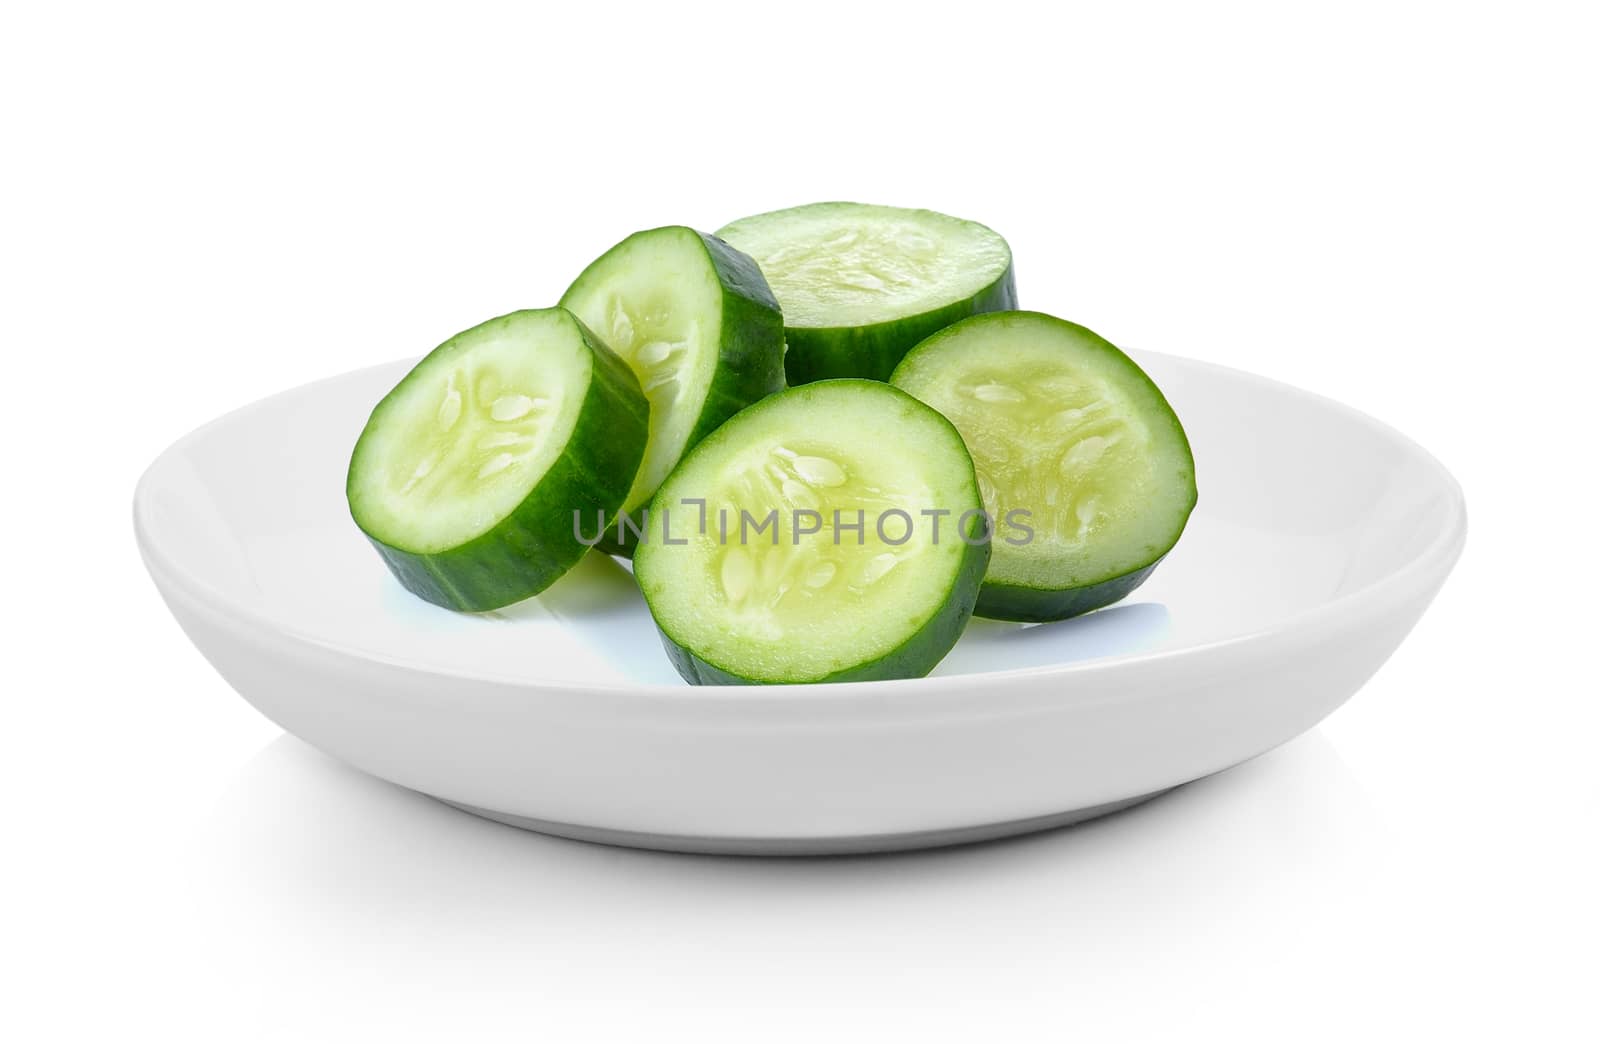 Cucumber slices in plate on white background